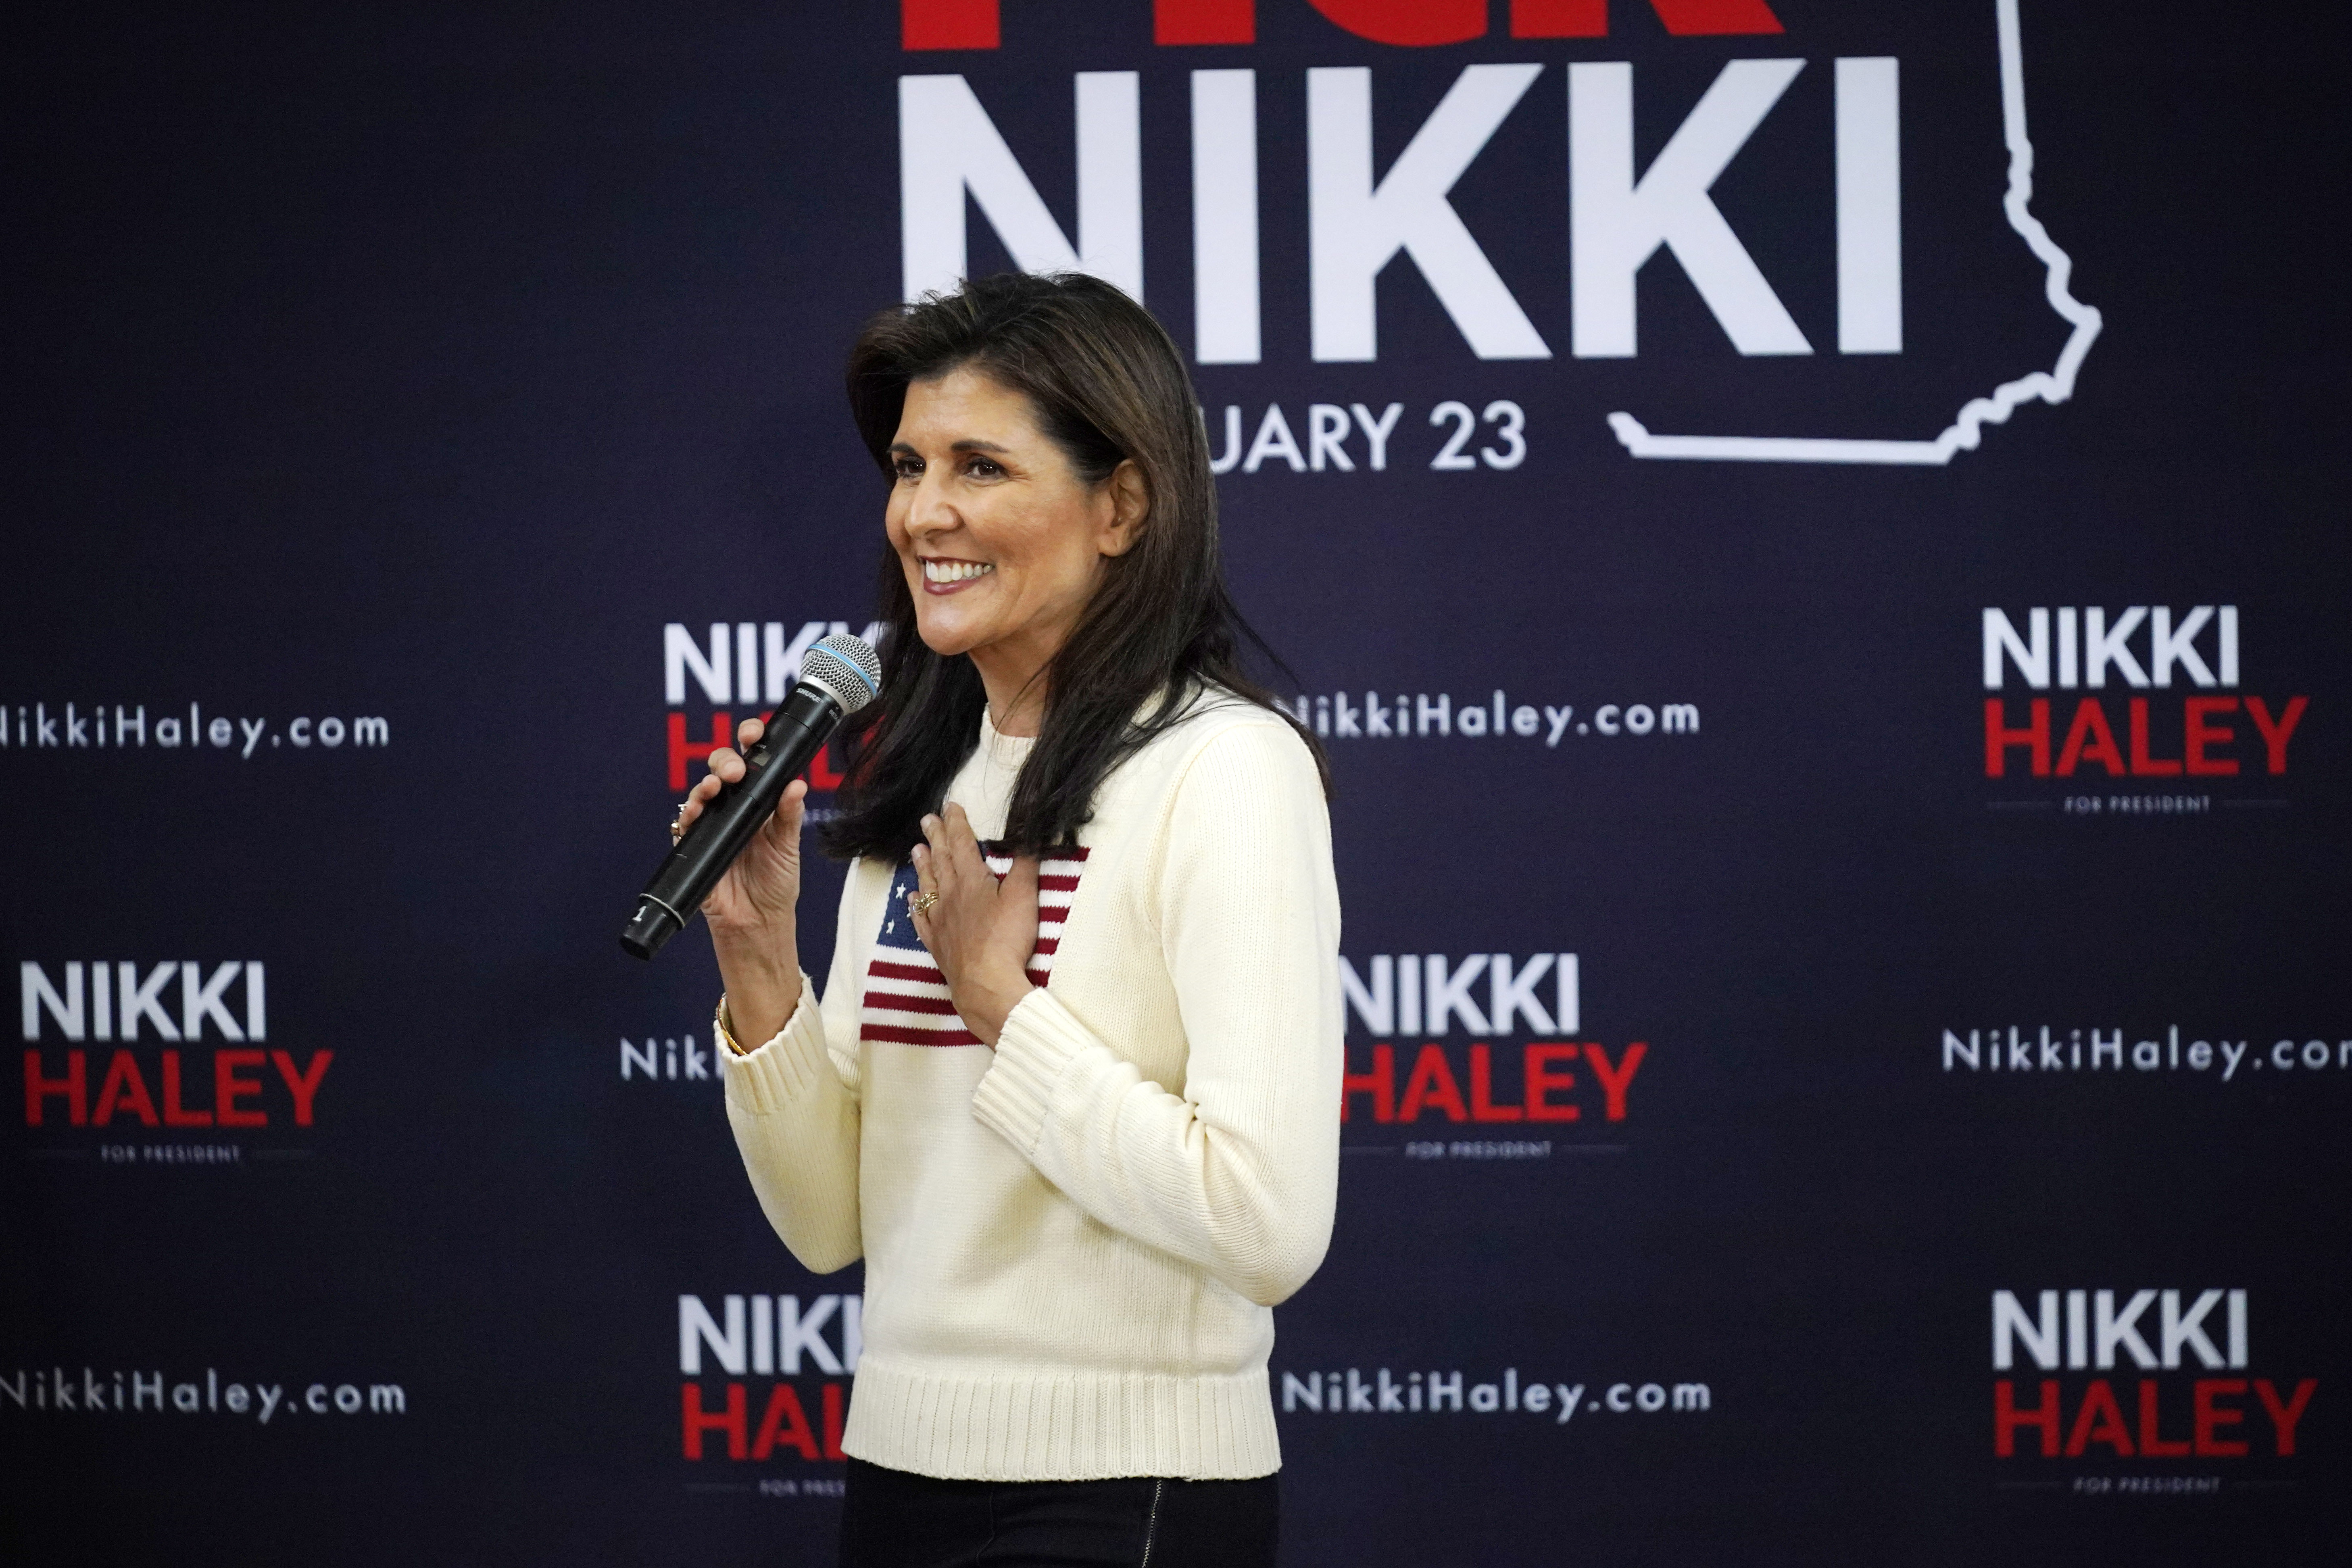 Republican presidential candidate Nikki Haley shows her appreciation for the crowd singing "Happy Birthday" to her during a campaign event in Peterborough, New Hampshire, on January 20.